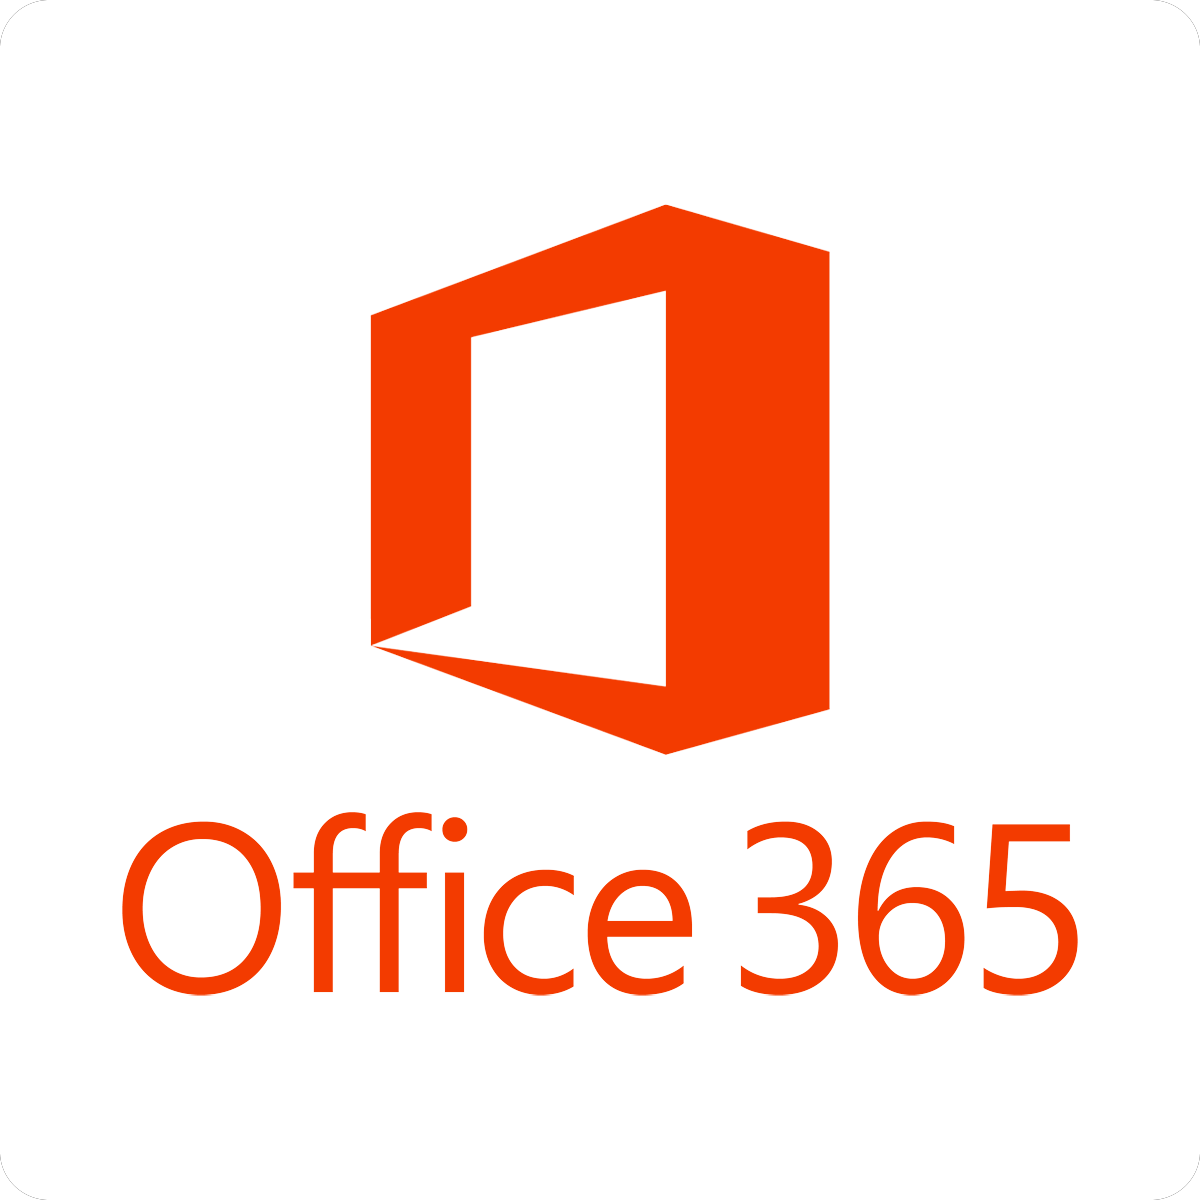 Microsoft Office 365 Suite | DWD Technology Group